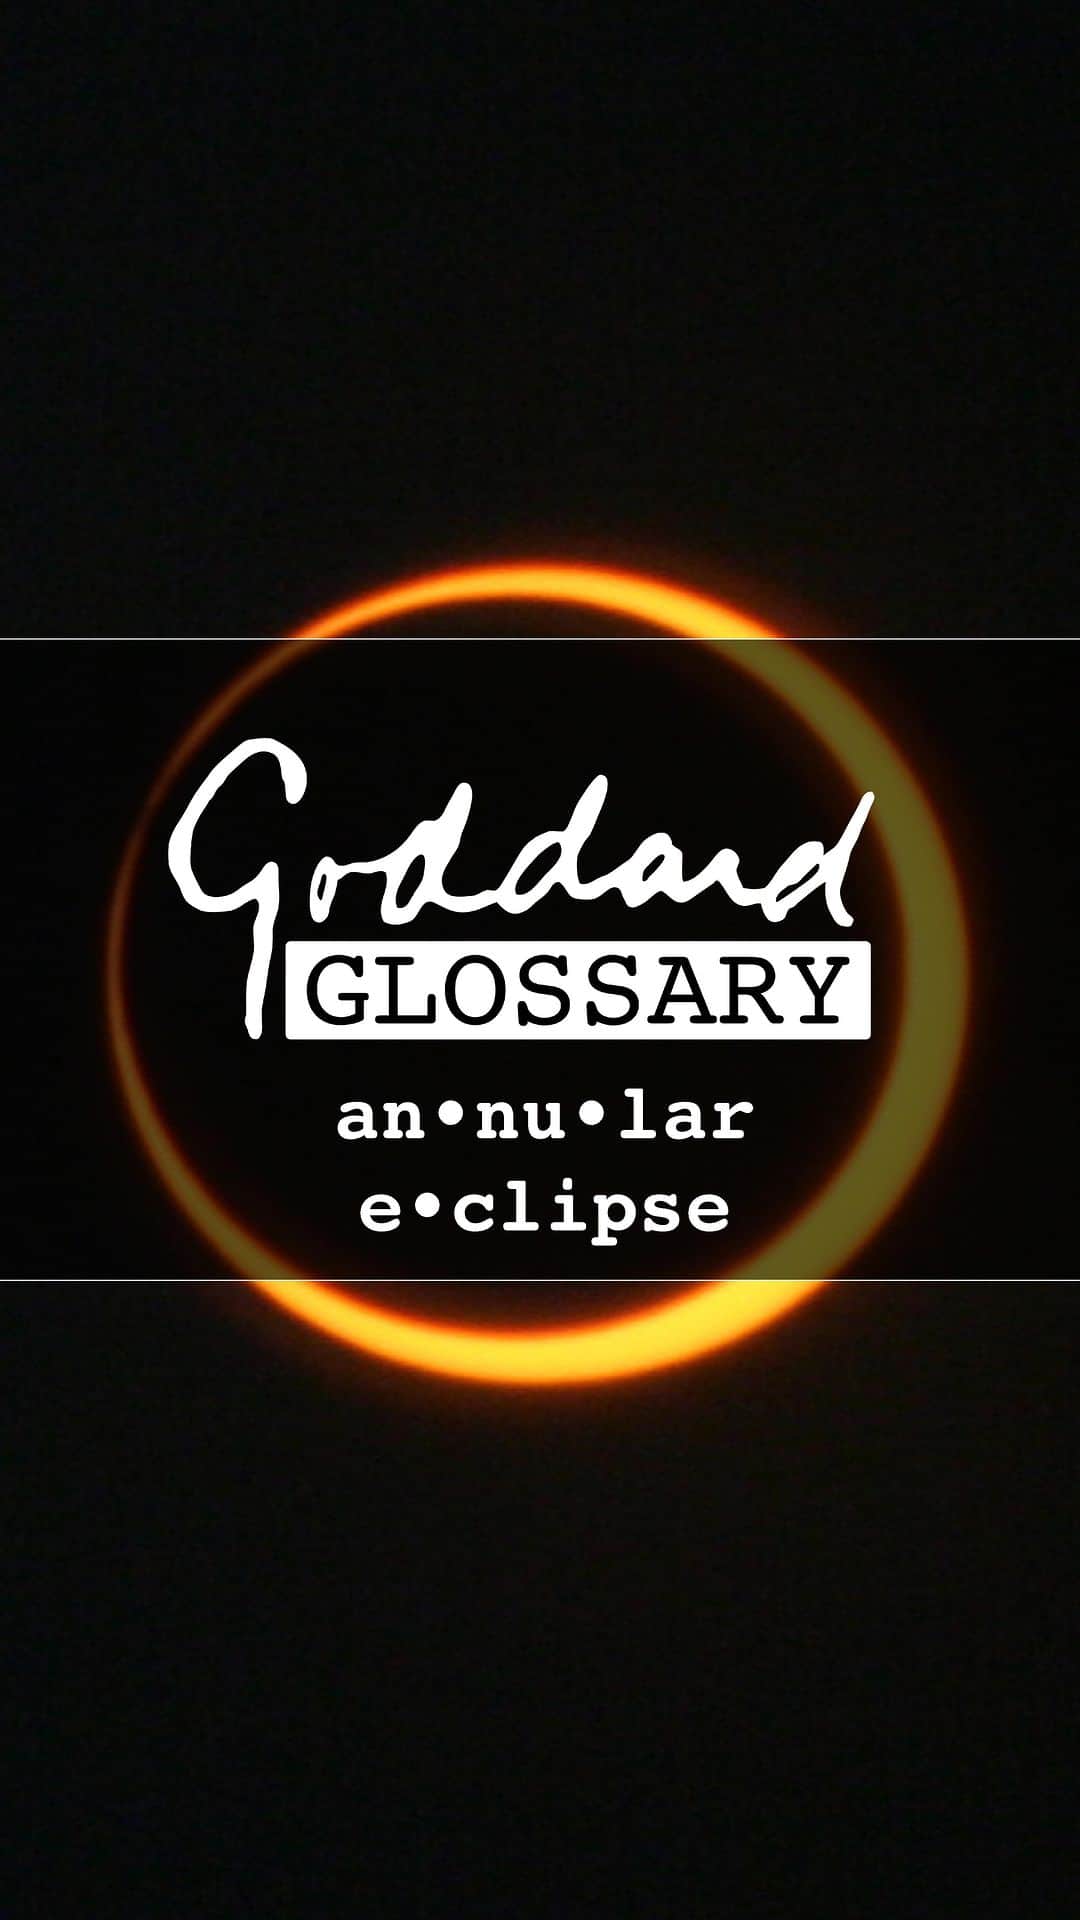 NASAのインスタグラム：「Doing your best, but not quite hitting 100%? The Moon gets that! 🌑  During an annular eclipse, the Moon covers most of the Sun, but not all. In this Goddard Glossary, learn the difference between annular and total solar eclipses and how other planets experience the phenomenon too!  Video description: 00:00 A woman in a black NASA sweatshirt in front of a black background with an image of annular eclipses behind the woman. The word annular eclipse is spelled phonetically across the top of the screen. 00:07 Animation of the Earth spinning while the Moon orbits around Earth. 00:11 Animation of Earth and Moon again but casting a shadow to showcase the angle of Moon to the Earth during an eclipse. 00:15 Back to the woman talking. 00: 18 Animation of the Moon in front of the Sun creating a “ring of fire” effect. 00:24 Completely blacked out Sun caused by the Moon from a total solar eclipse. 00:27 A visualization of the Moon in different phases across a dark sky. 00: 32 Back to the woman talking. 00:36 Black and white Visualization of Saturn and Moon showcasing its rings. 00:39 Close of up Saturn’s rings. 00:42 Black and white panning visualization of Saturn. 00:45 Black and white visualization of an eclipse behind Saturn’s rings. 00:48 Back to woman talking. 00:52 Video of woman placing solar eye protective glasses on. 00:57: Back to woman talking.  #Eclipse #AnnularEclipse #SolarEclipse #NASA #Space #Sun #Moon」